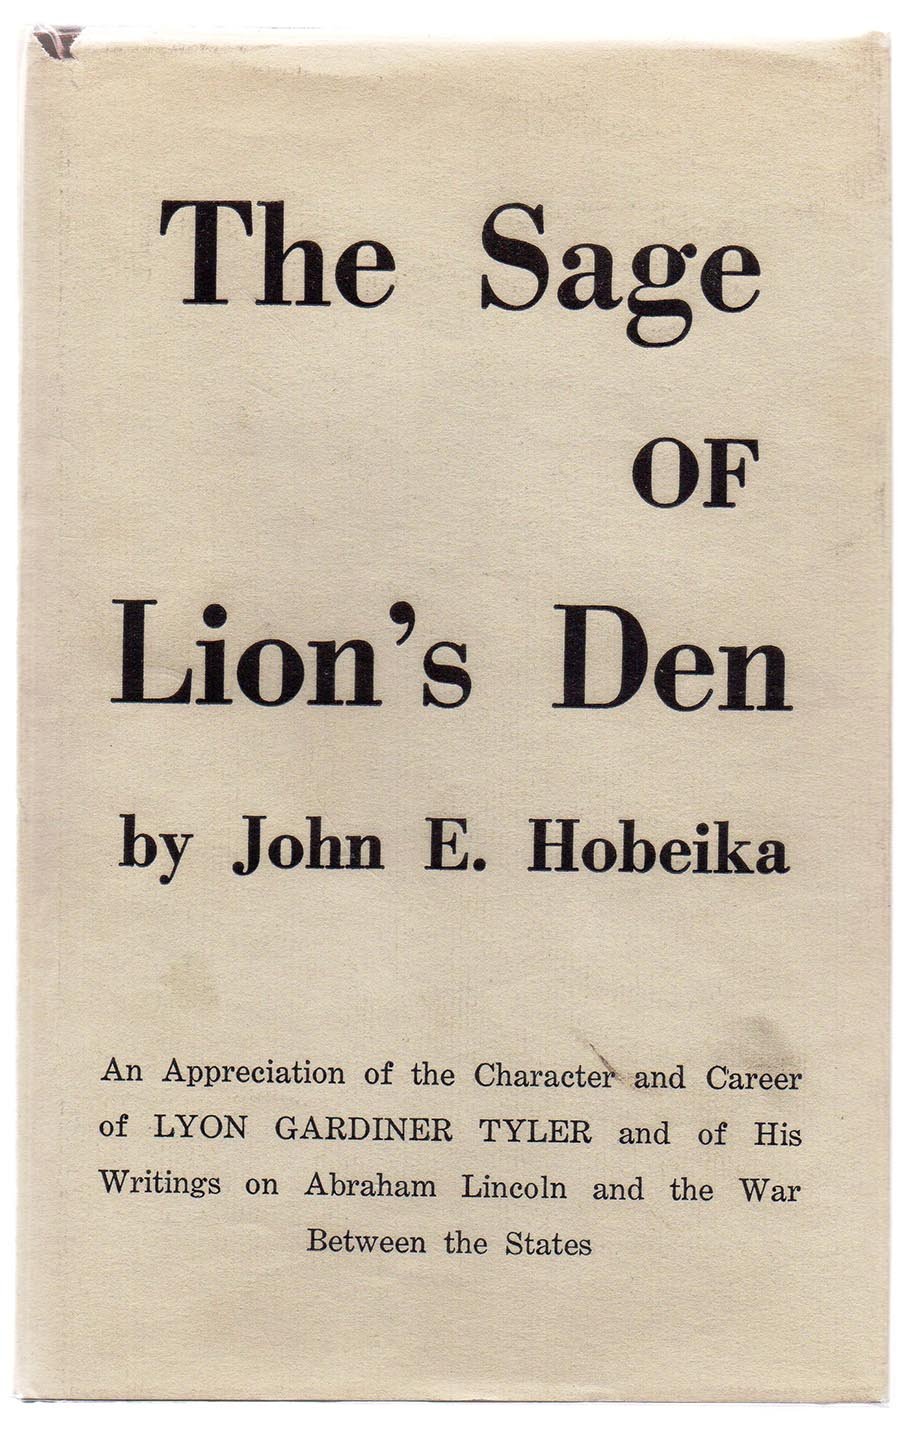 The Sage of Lion's Den: An Appreciation of the Character and Career of Lyon Gardiner Tyler and of His Writings on Abraham Lincoln and the War Between the States